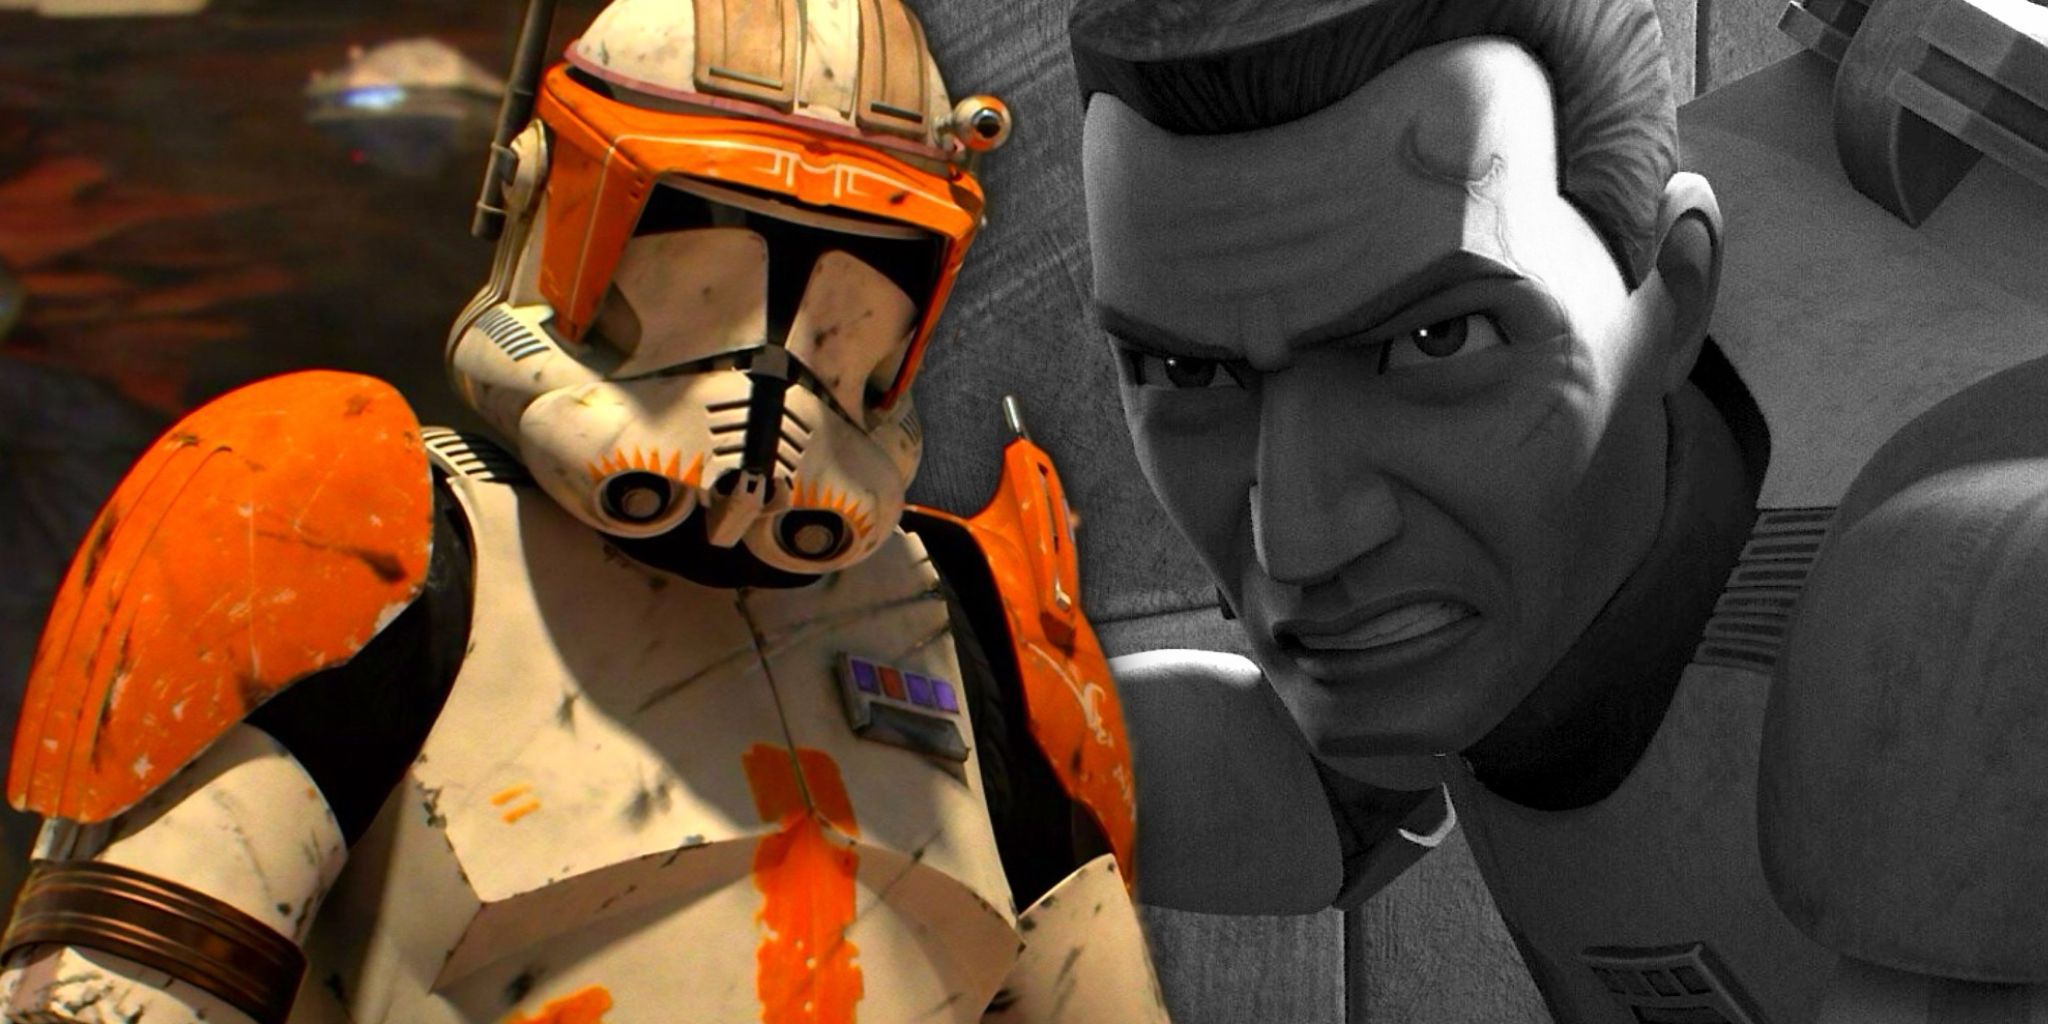 Commander Cody receives Order 66 in Revenge of the Sith superimposed over angry Cody in The Bad Batch season 2